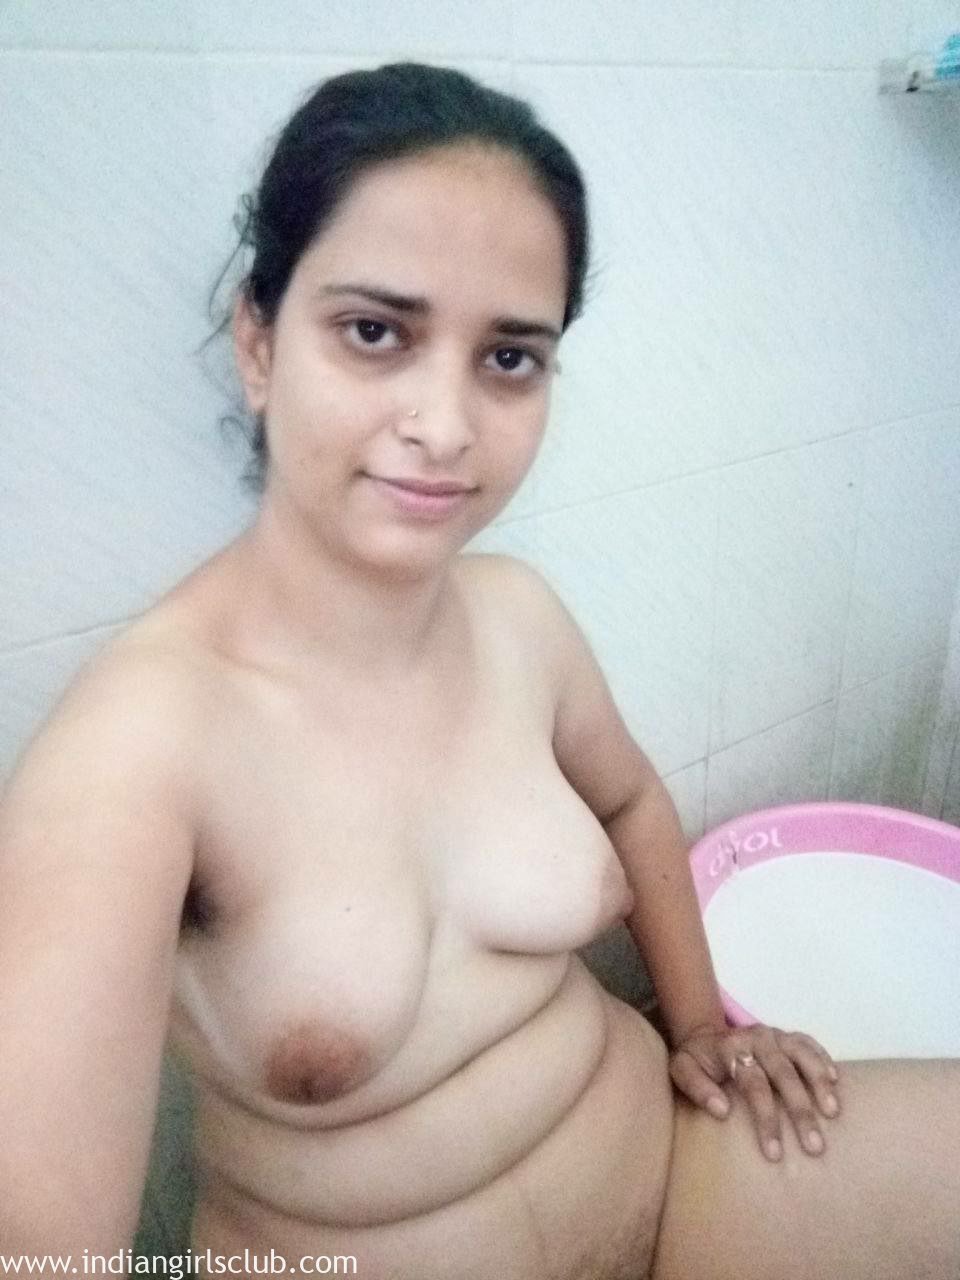 Homely Indian Pussy - hot-desi-aunty-revealing-her-hairy-pussy-19 - Indian Girls Club - Nude  Indian Girls & Hot Sexy Indian Babes